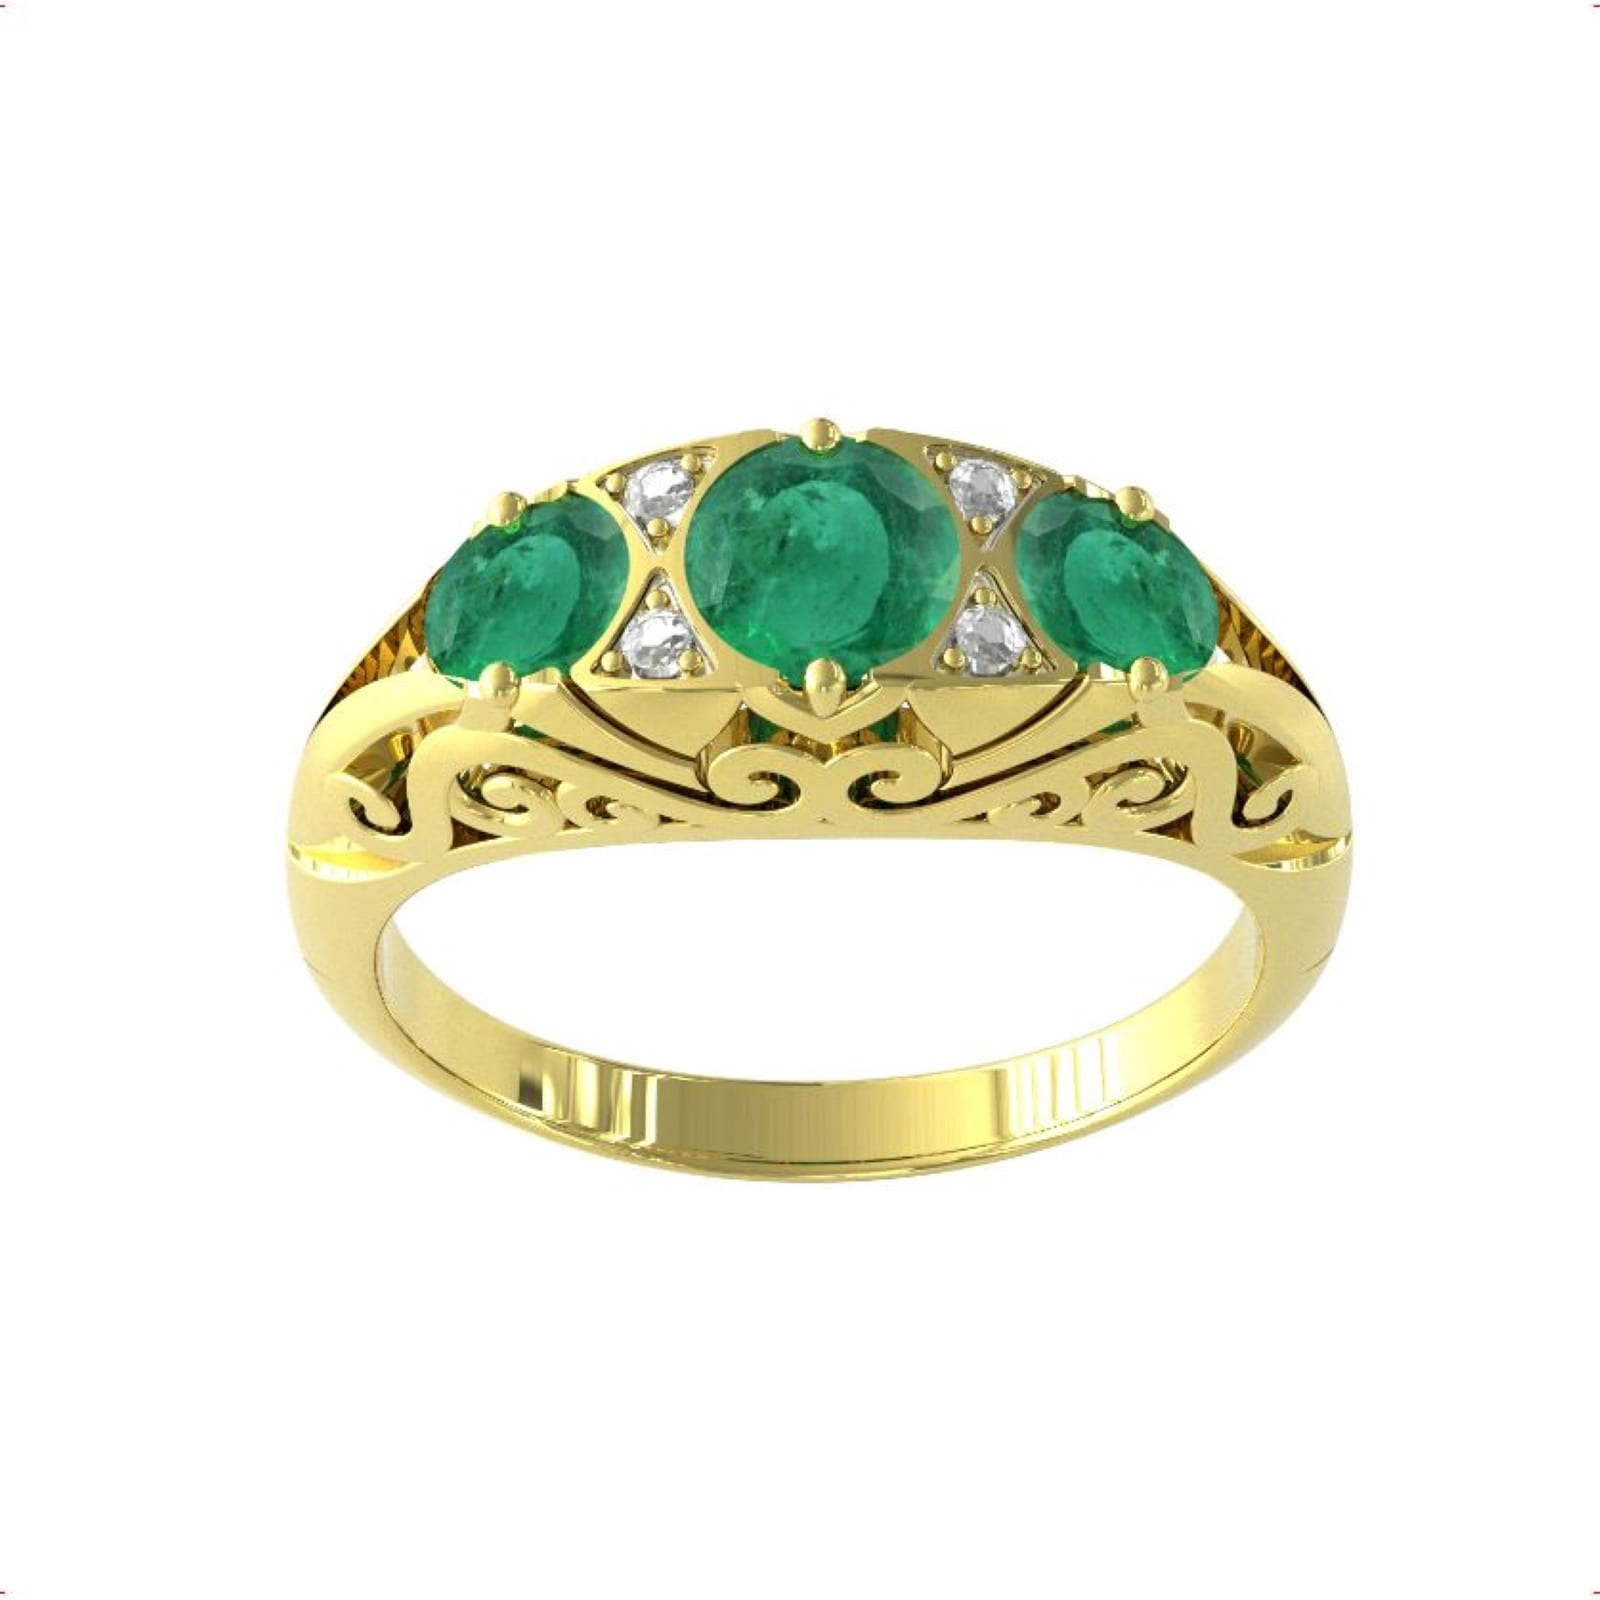 9ct Yellow Gold Victorian Style 3 Stone Emerald & Diamond Ring - Ring Size T.5